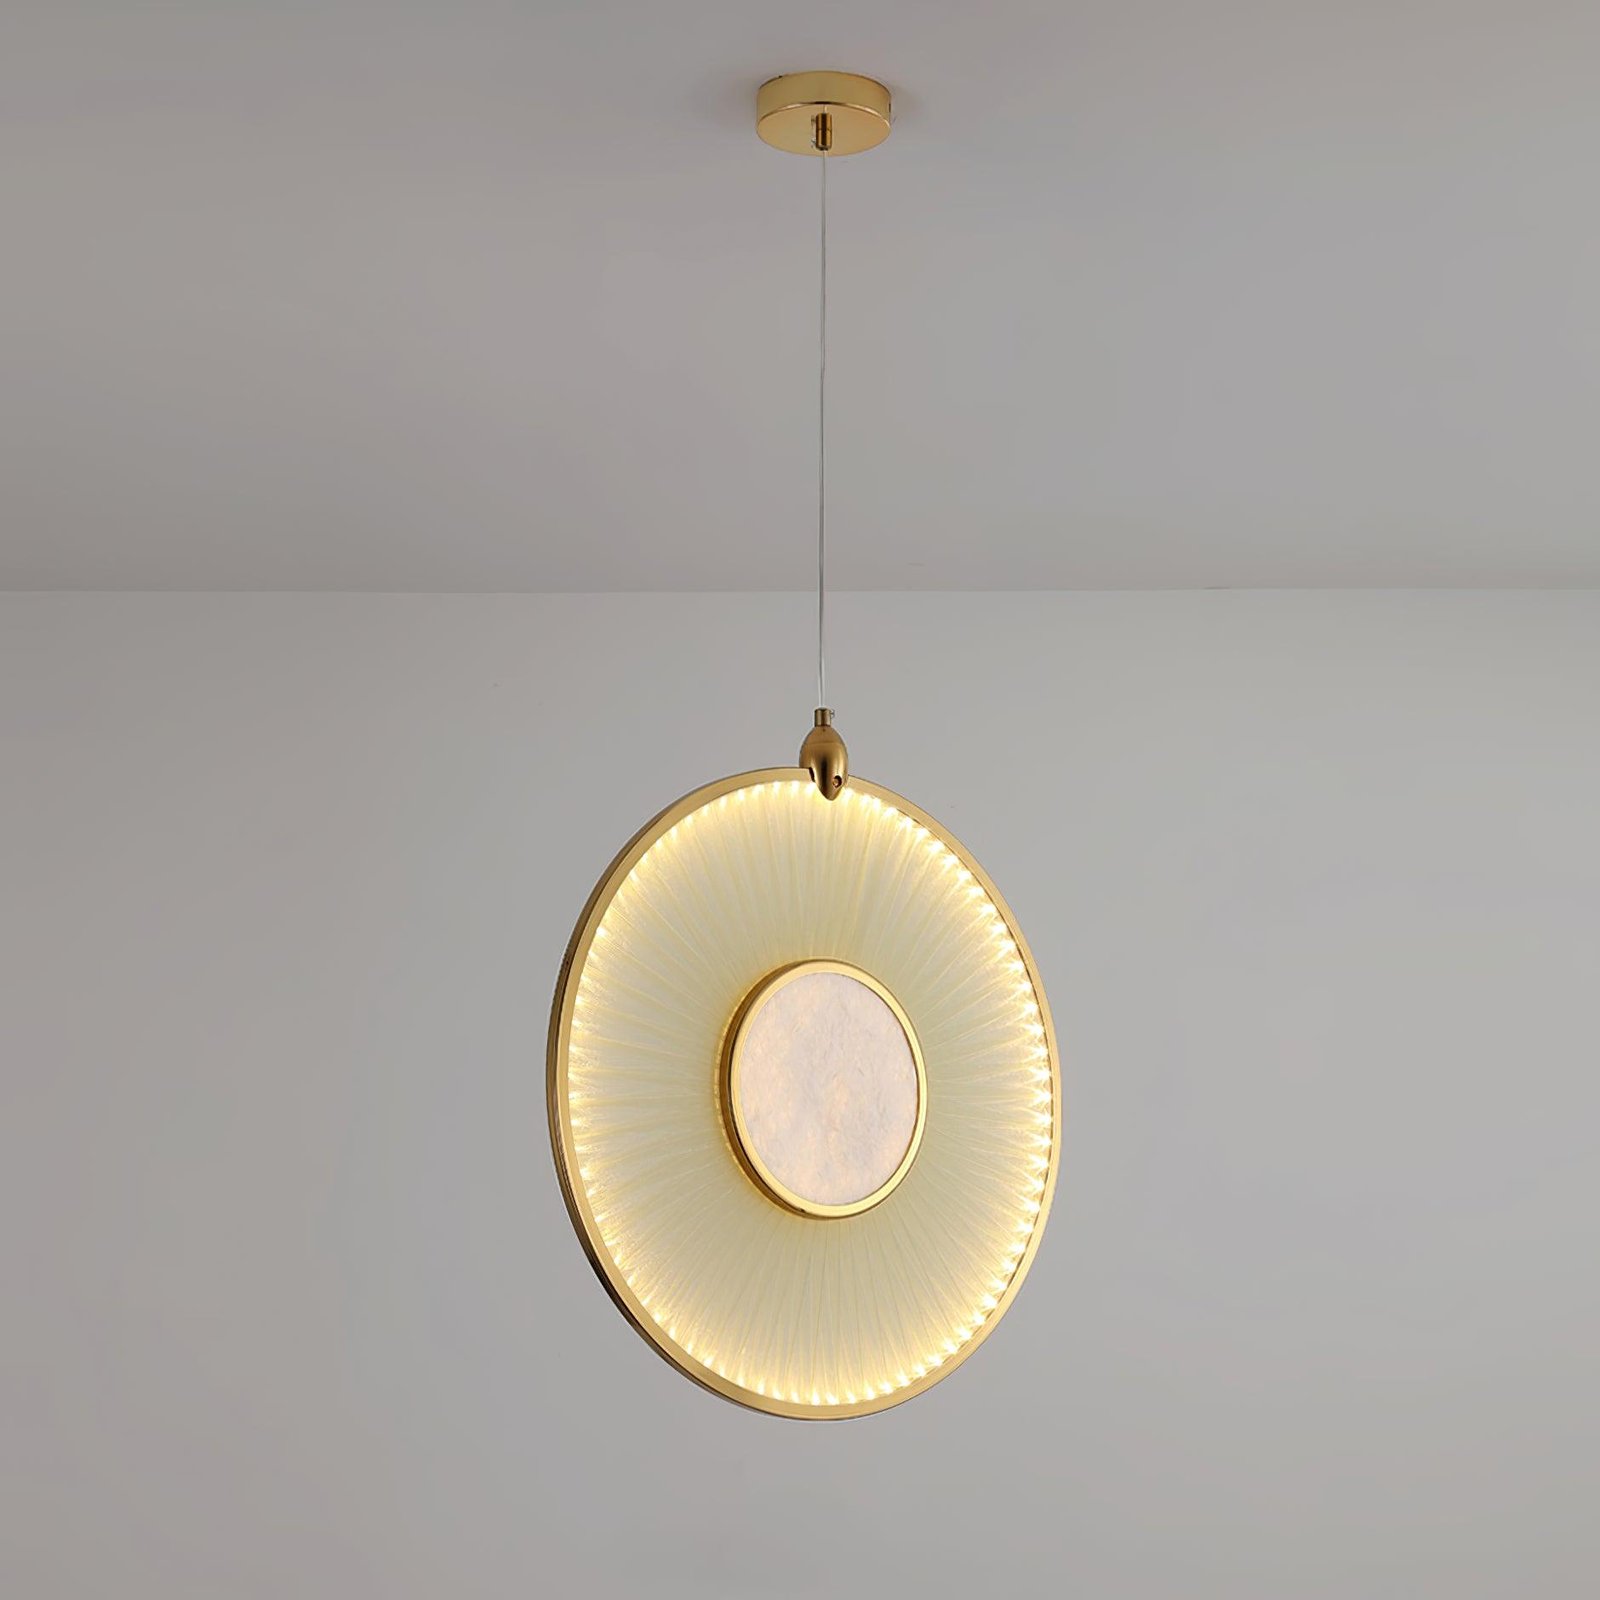 A possible rephrased product title could be: 
"Dix Heures Pendant Light in Gold Finish, with ∅ 31.5″ x H 31.5″ (Dia 80cm x H 80cm) Dimensions and Cool Light Function"